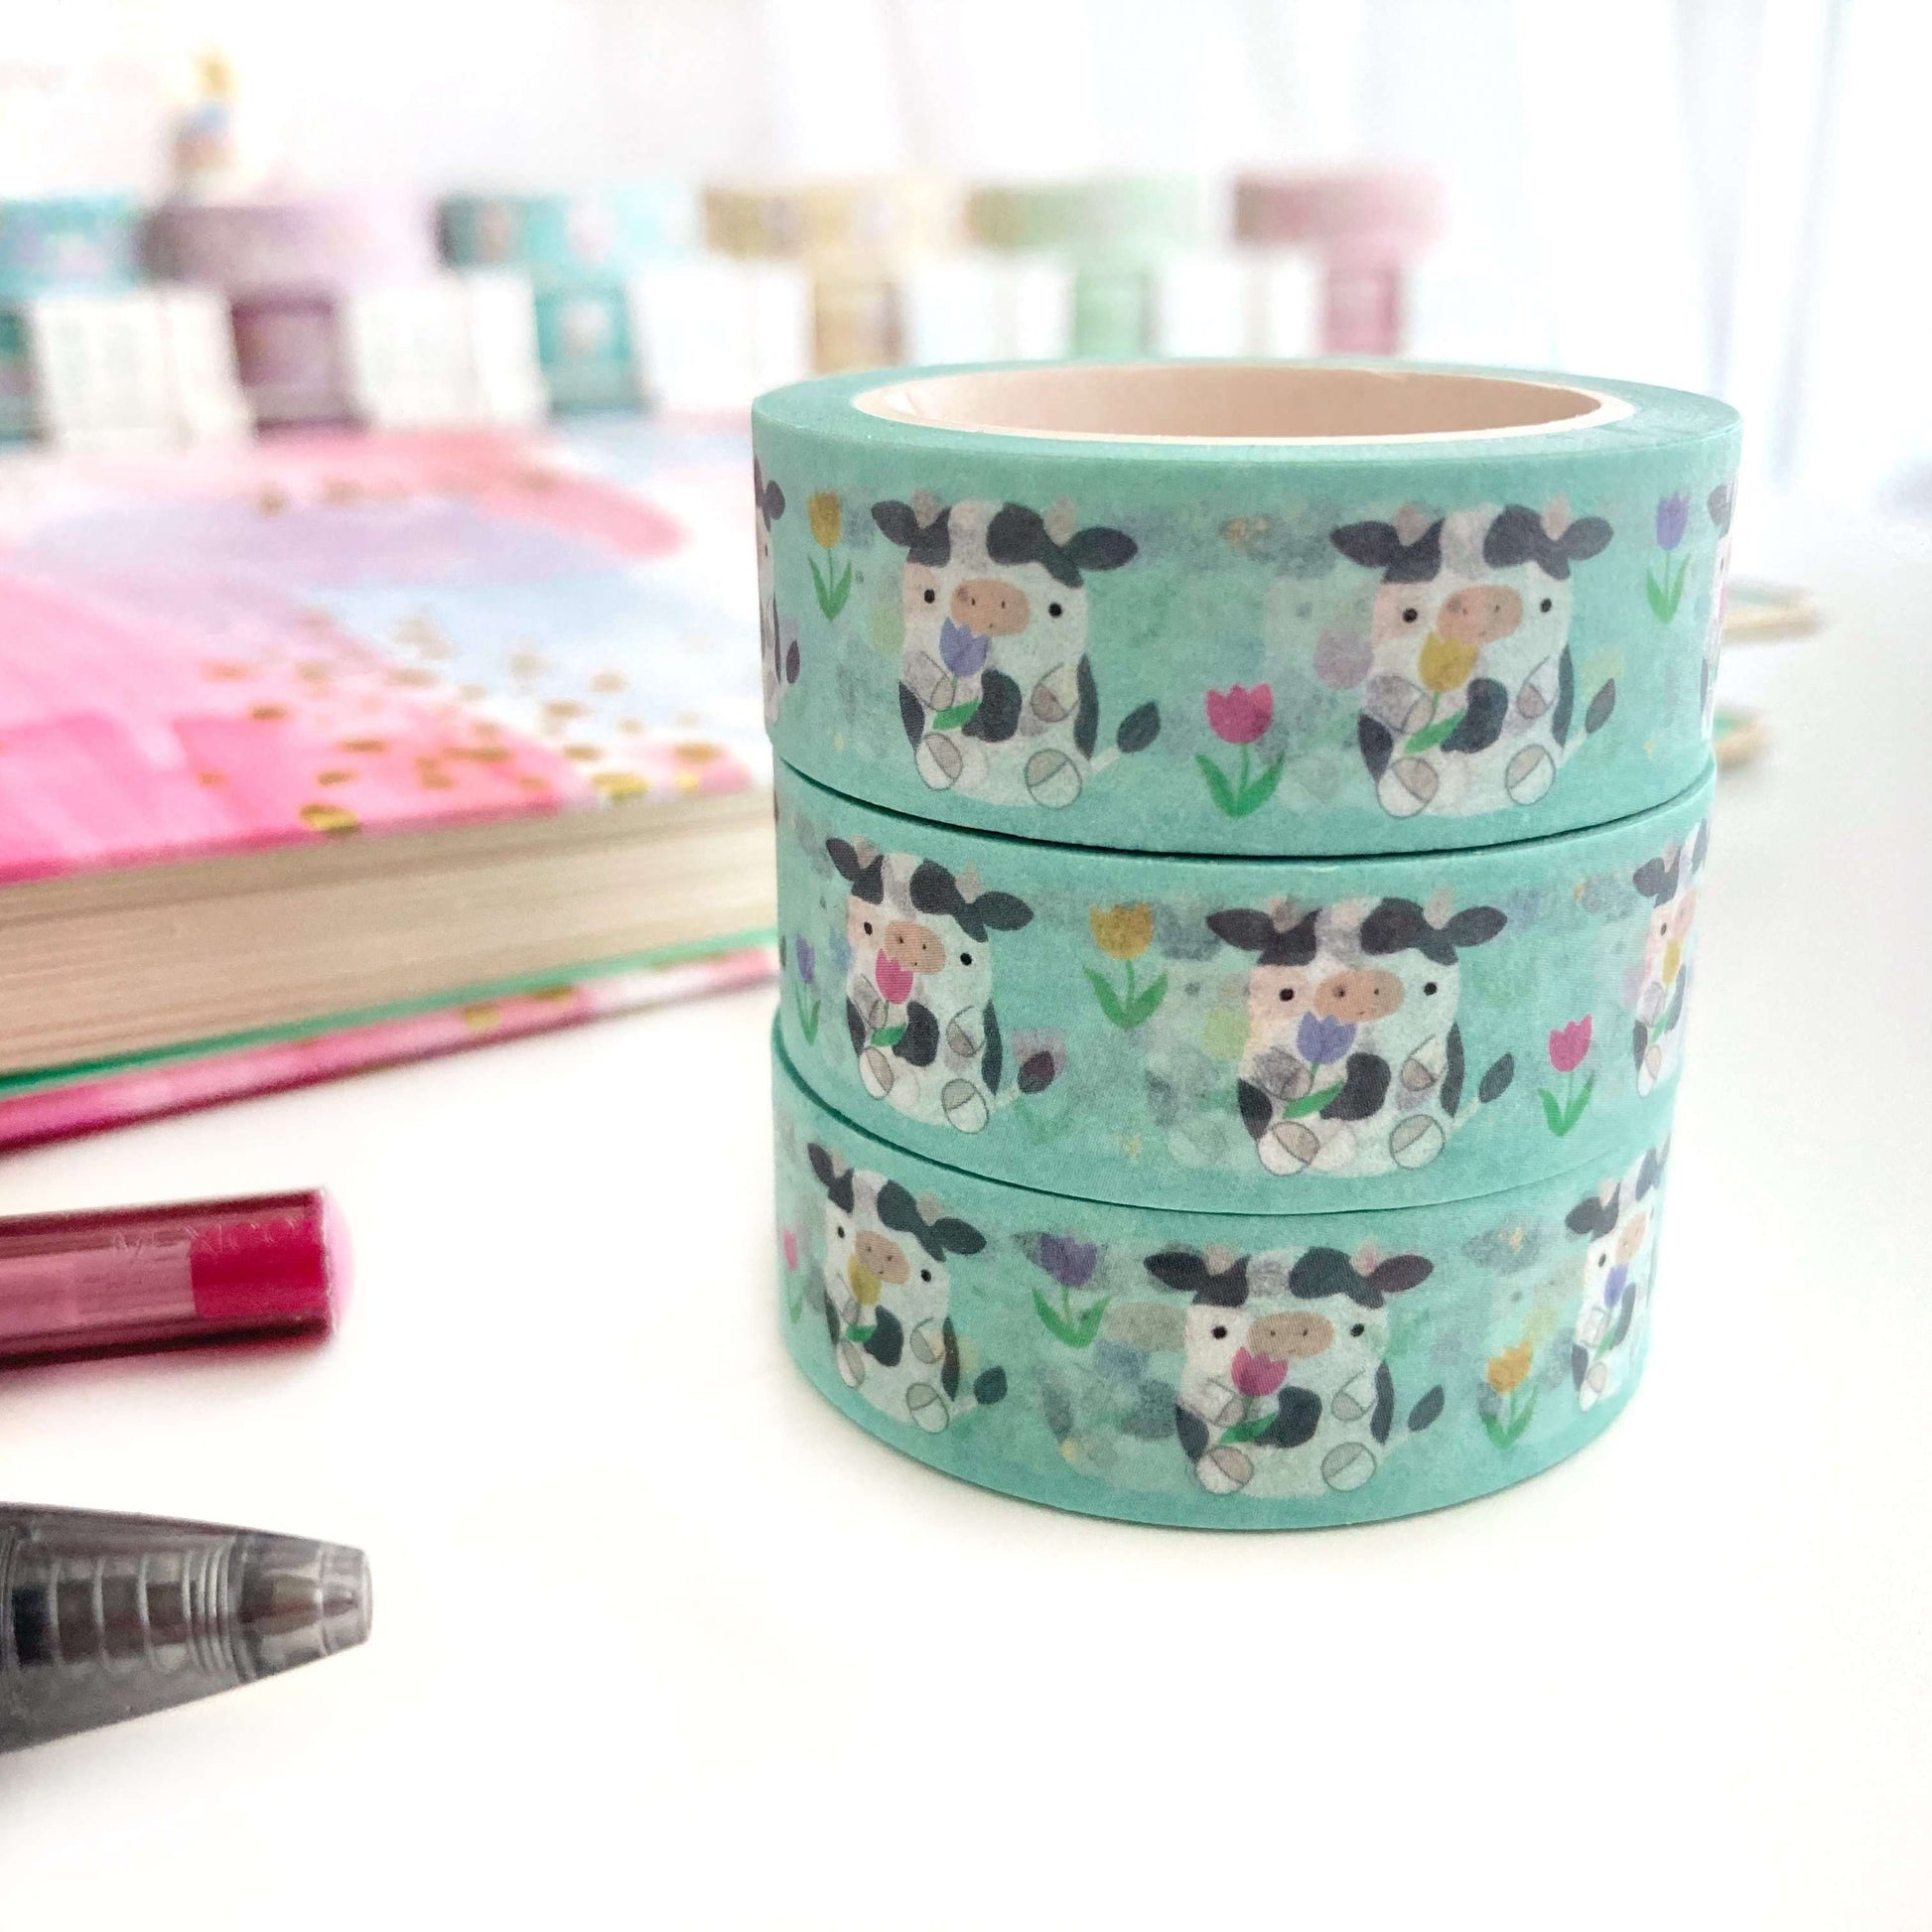 Wild Whimsy Woolies - Fruit Sloth Washi Tape - Cute Stationery